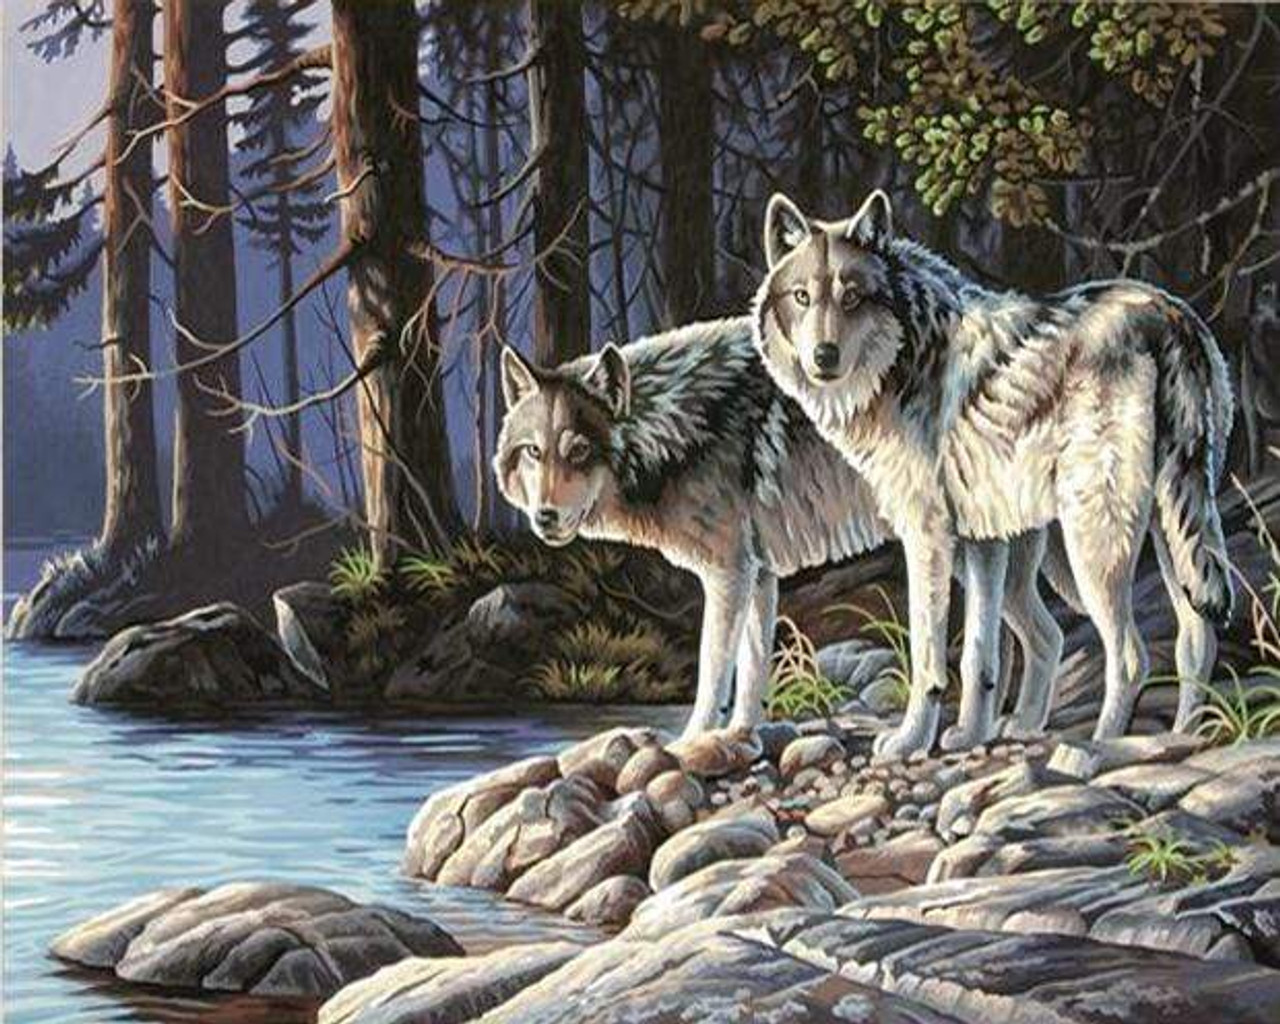 5D Diamond Painting Wolves by the Stream Kit - Bonanza Marketplace